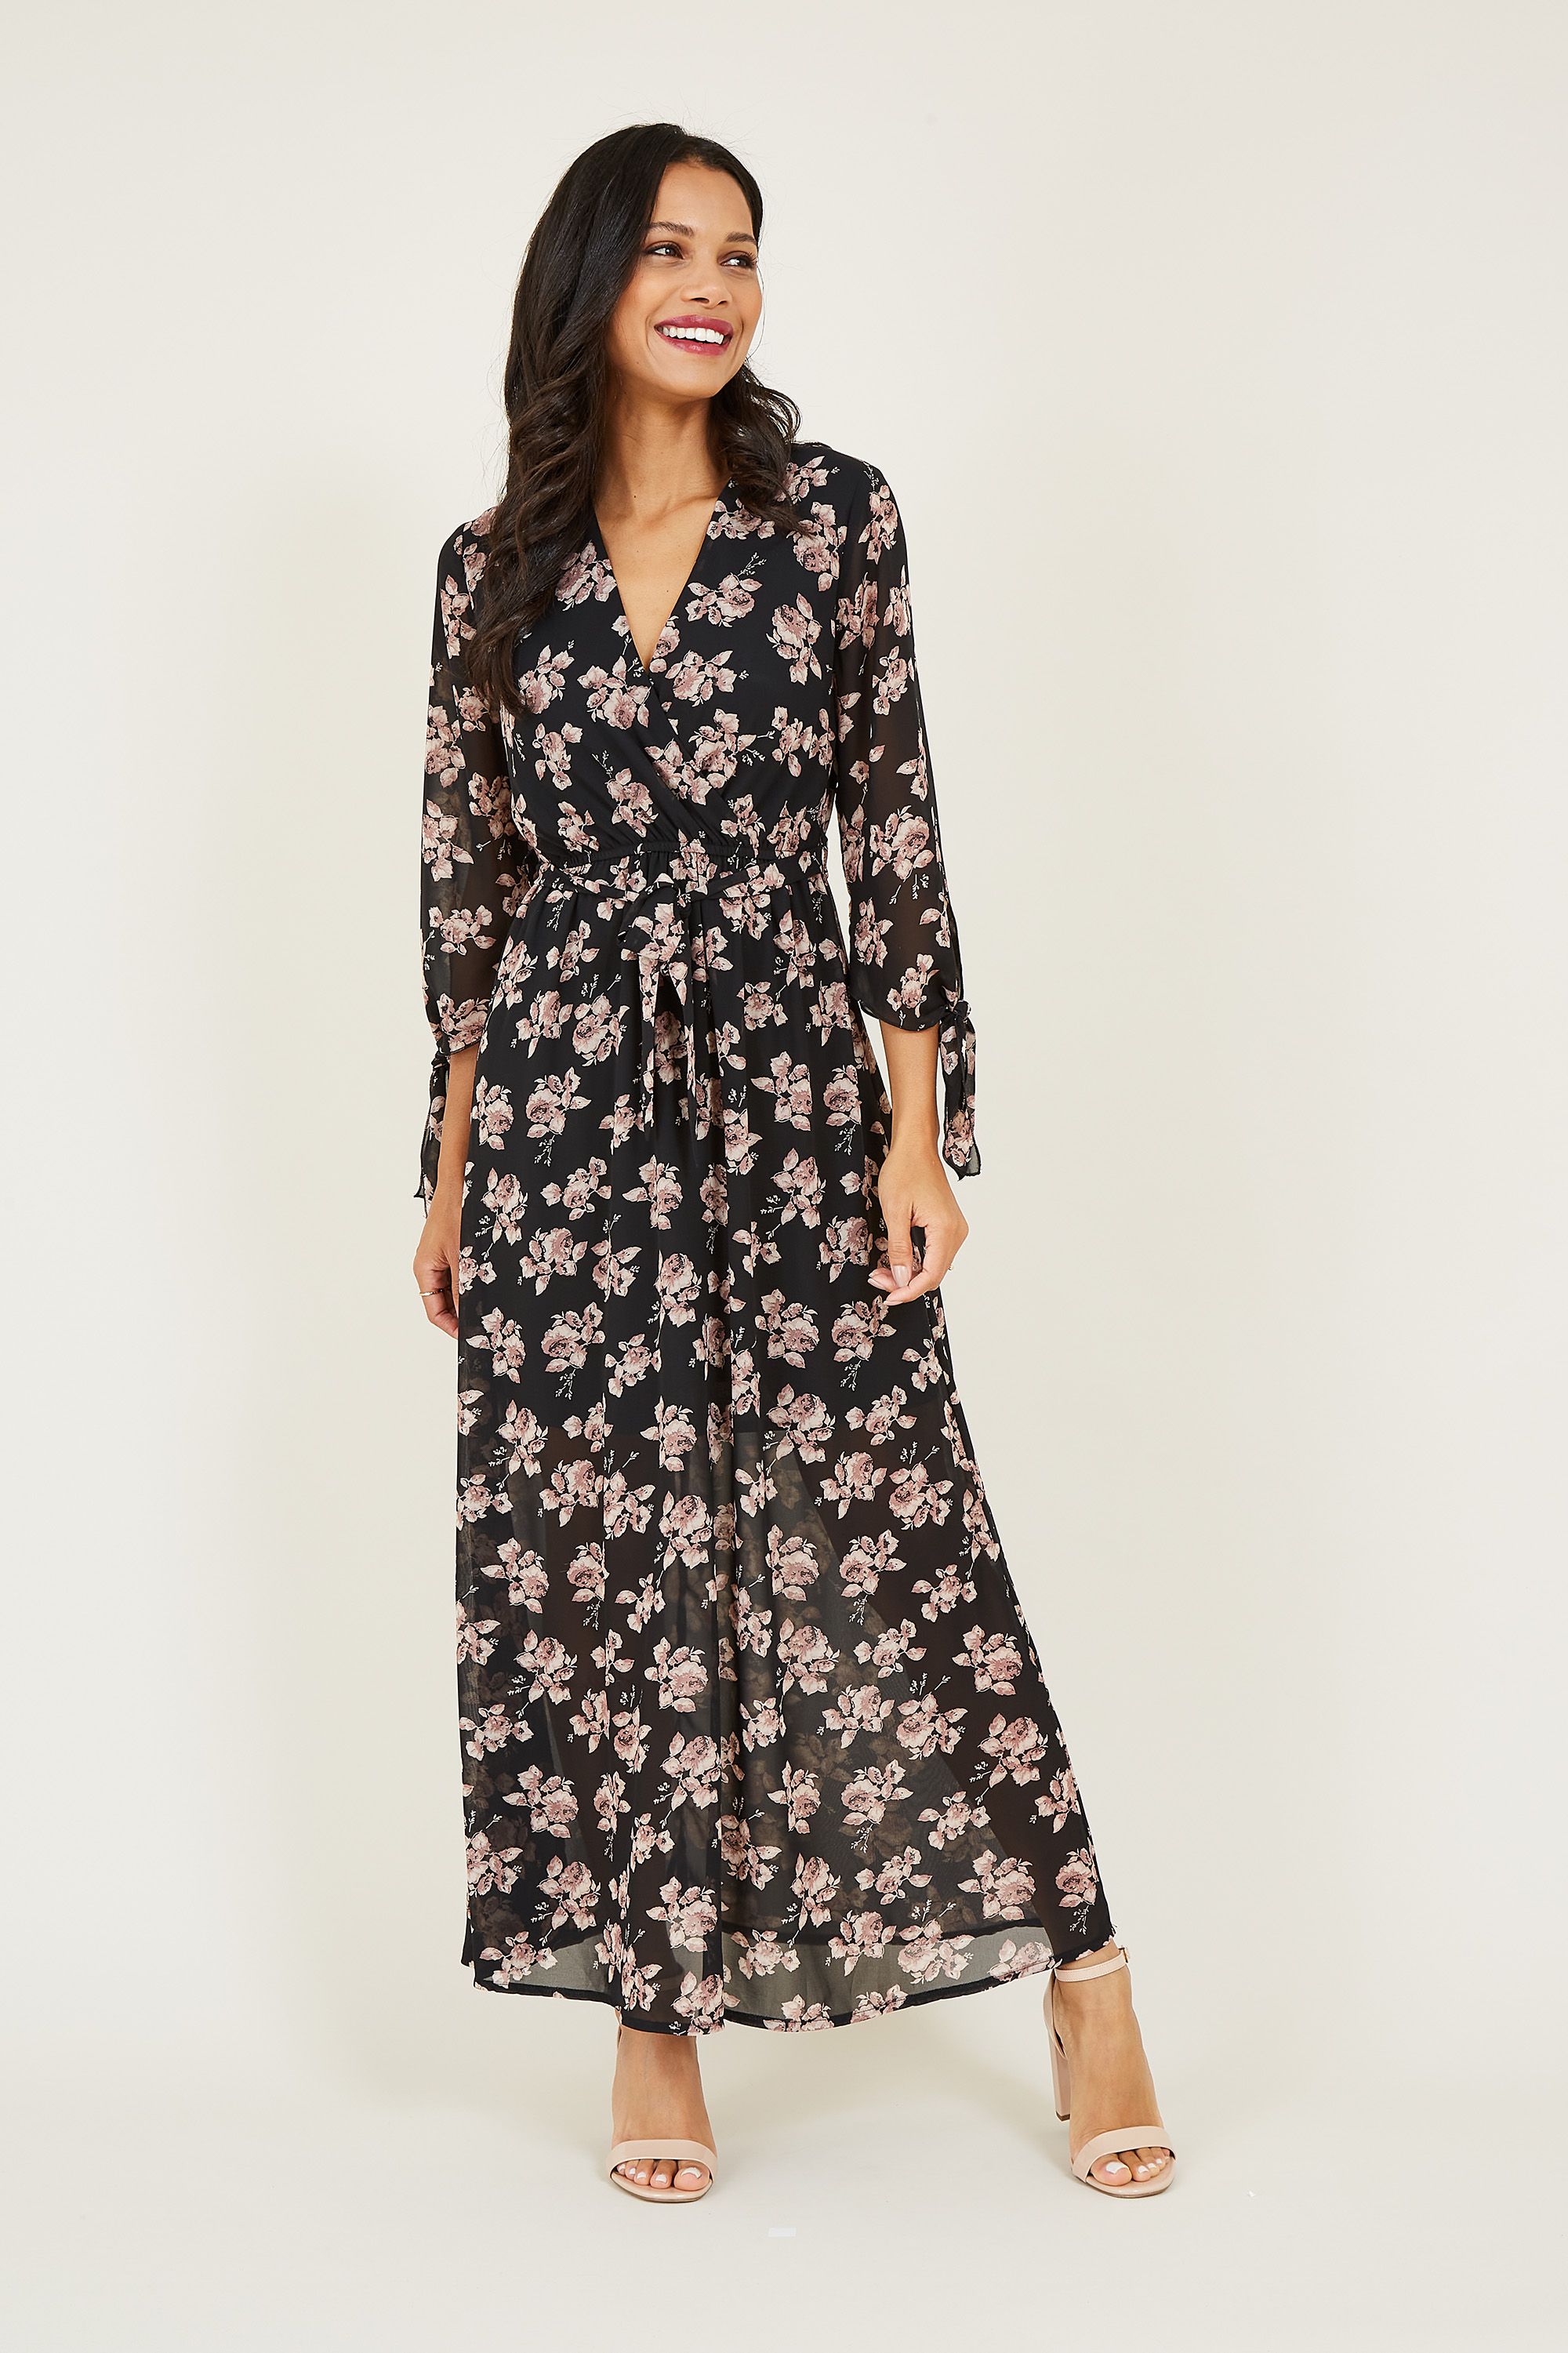 For effortless dressing with a feminine feel, opt for this Mela Rose Maxi Dress. Falling to the ankle, it's designed with long sleeves enhanced by sweet ties and a V-neckline. Secured by a waist tie, the lightweight fabric is printed with pretty florals to enhance your eveningwear. Accessorize with heels for an elegant finish.